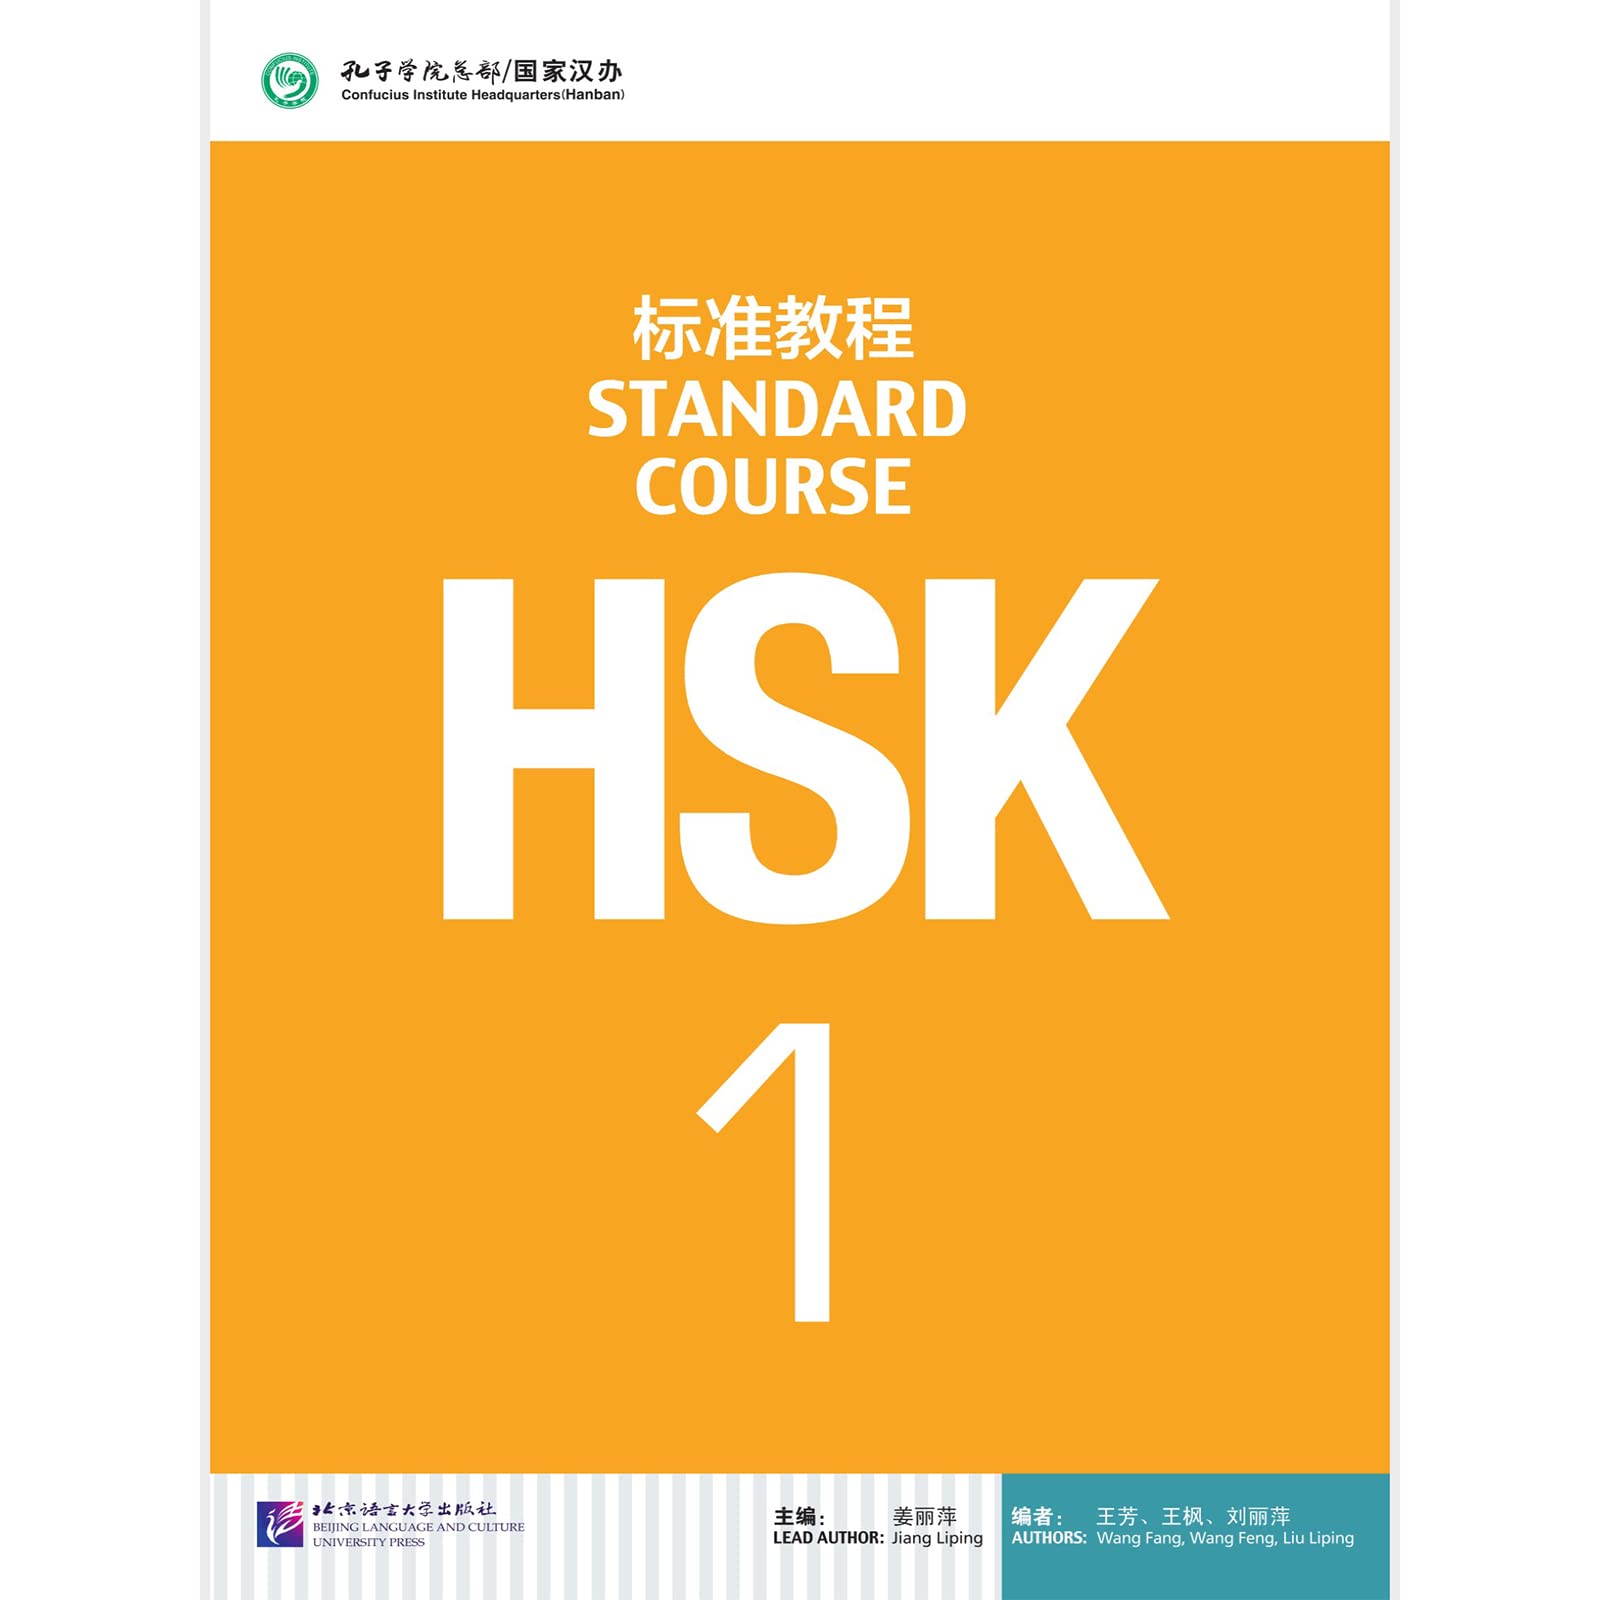 HSK Standard Course 1 SET - Textbook +Workbook (Chinese and English Edition)